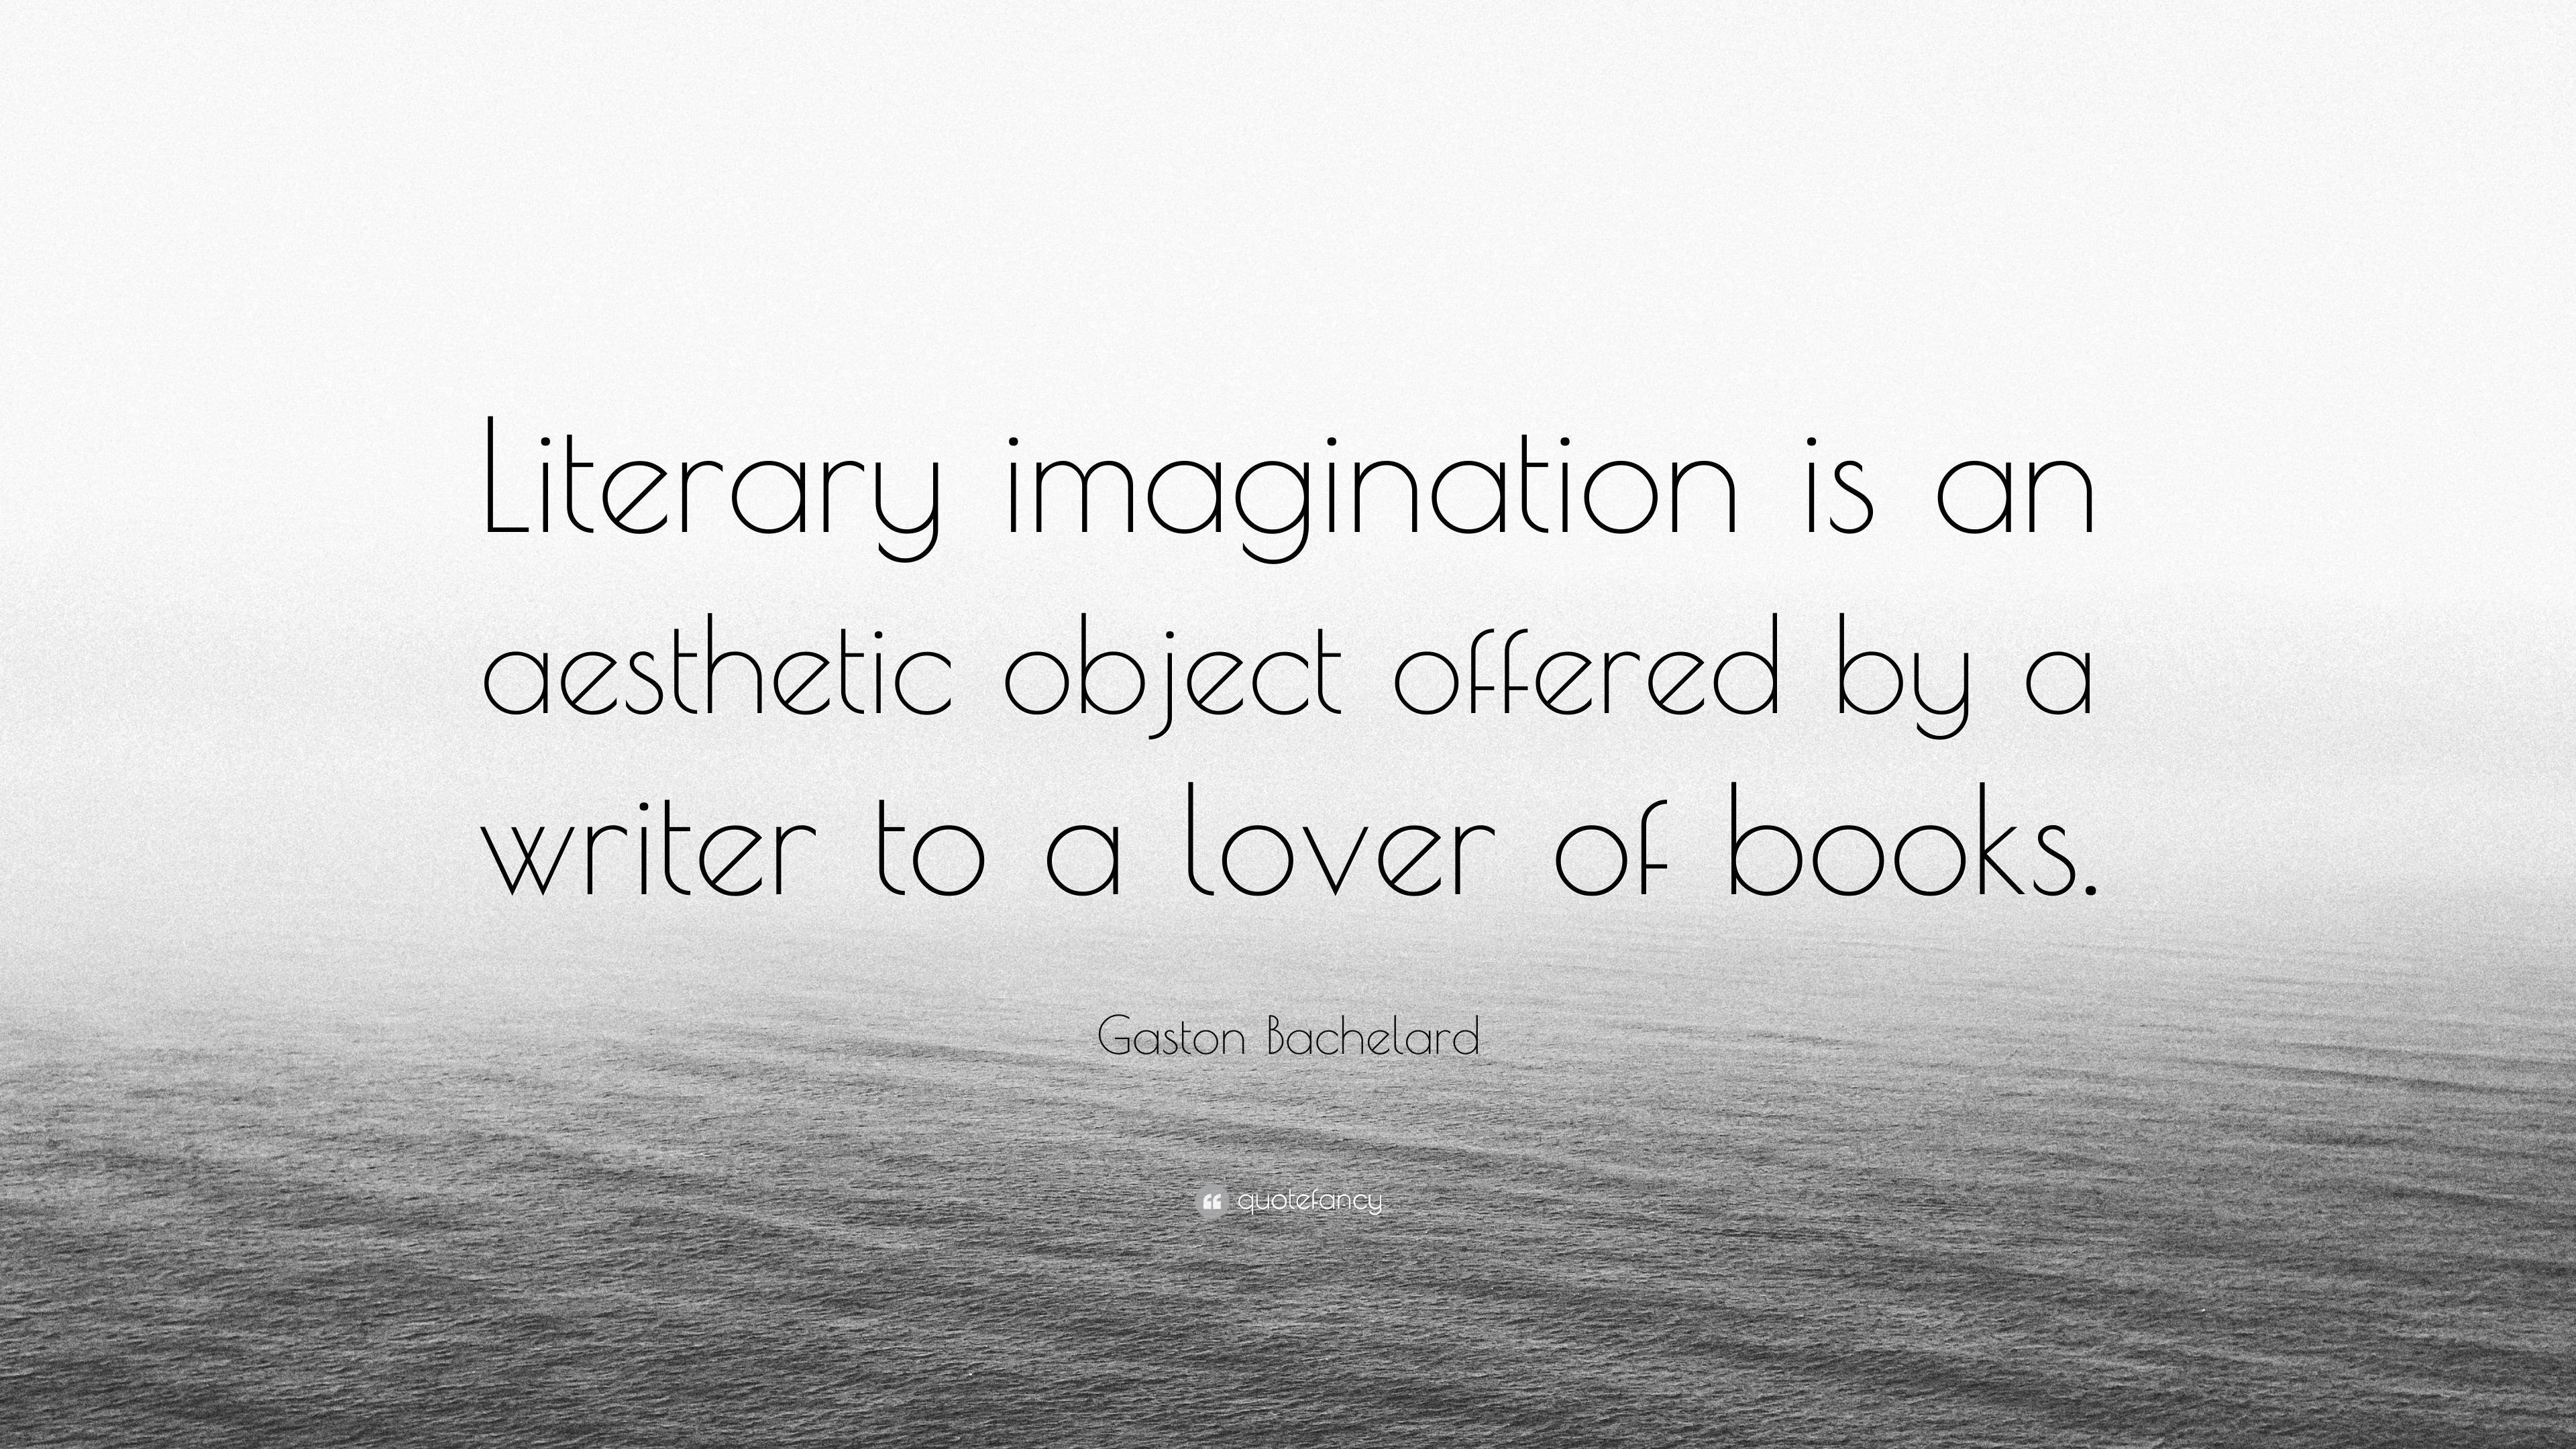 Gaston Bachelard Quote: “Literary imagination is an aesthetic object  offered by a writer to a lover